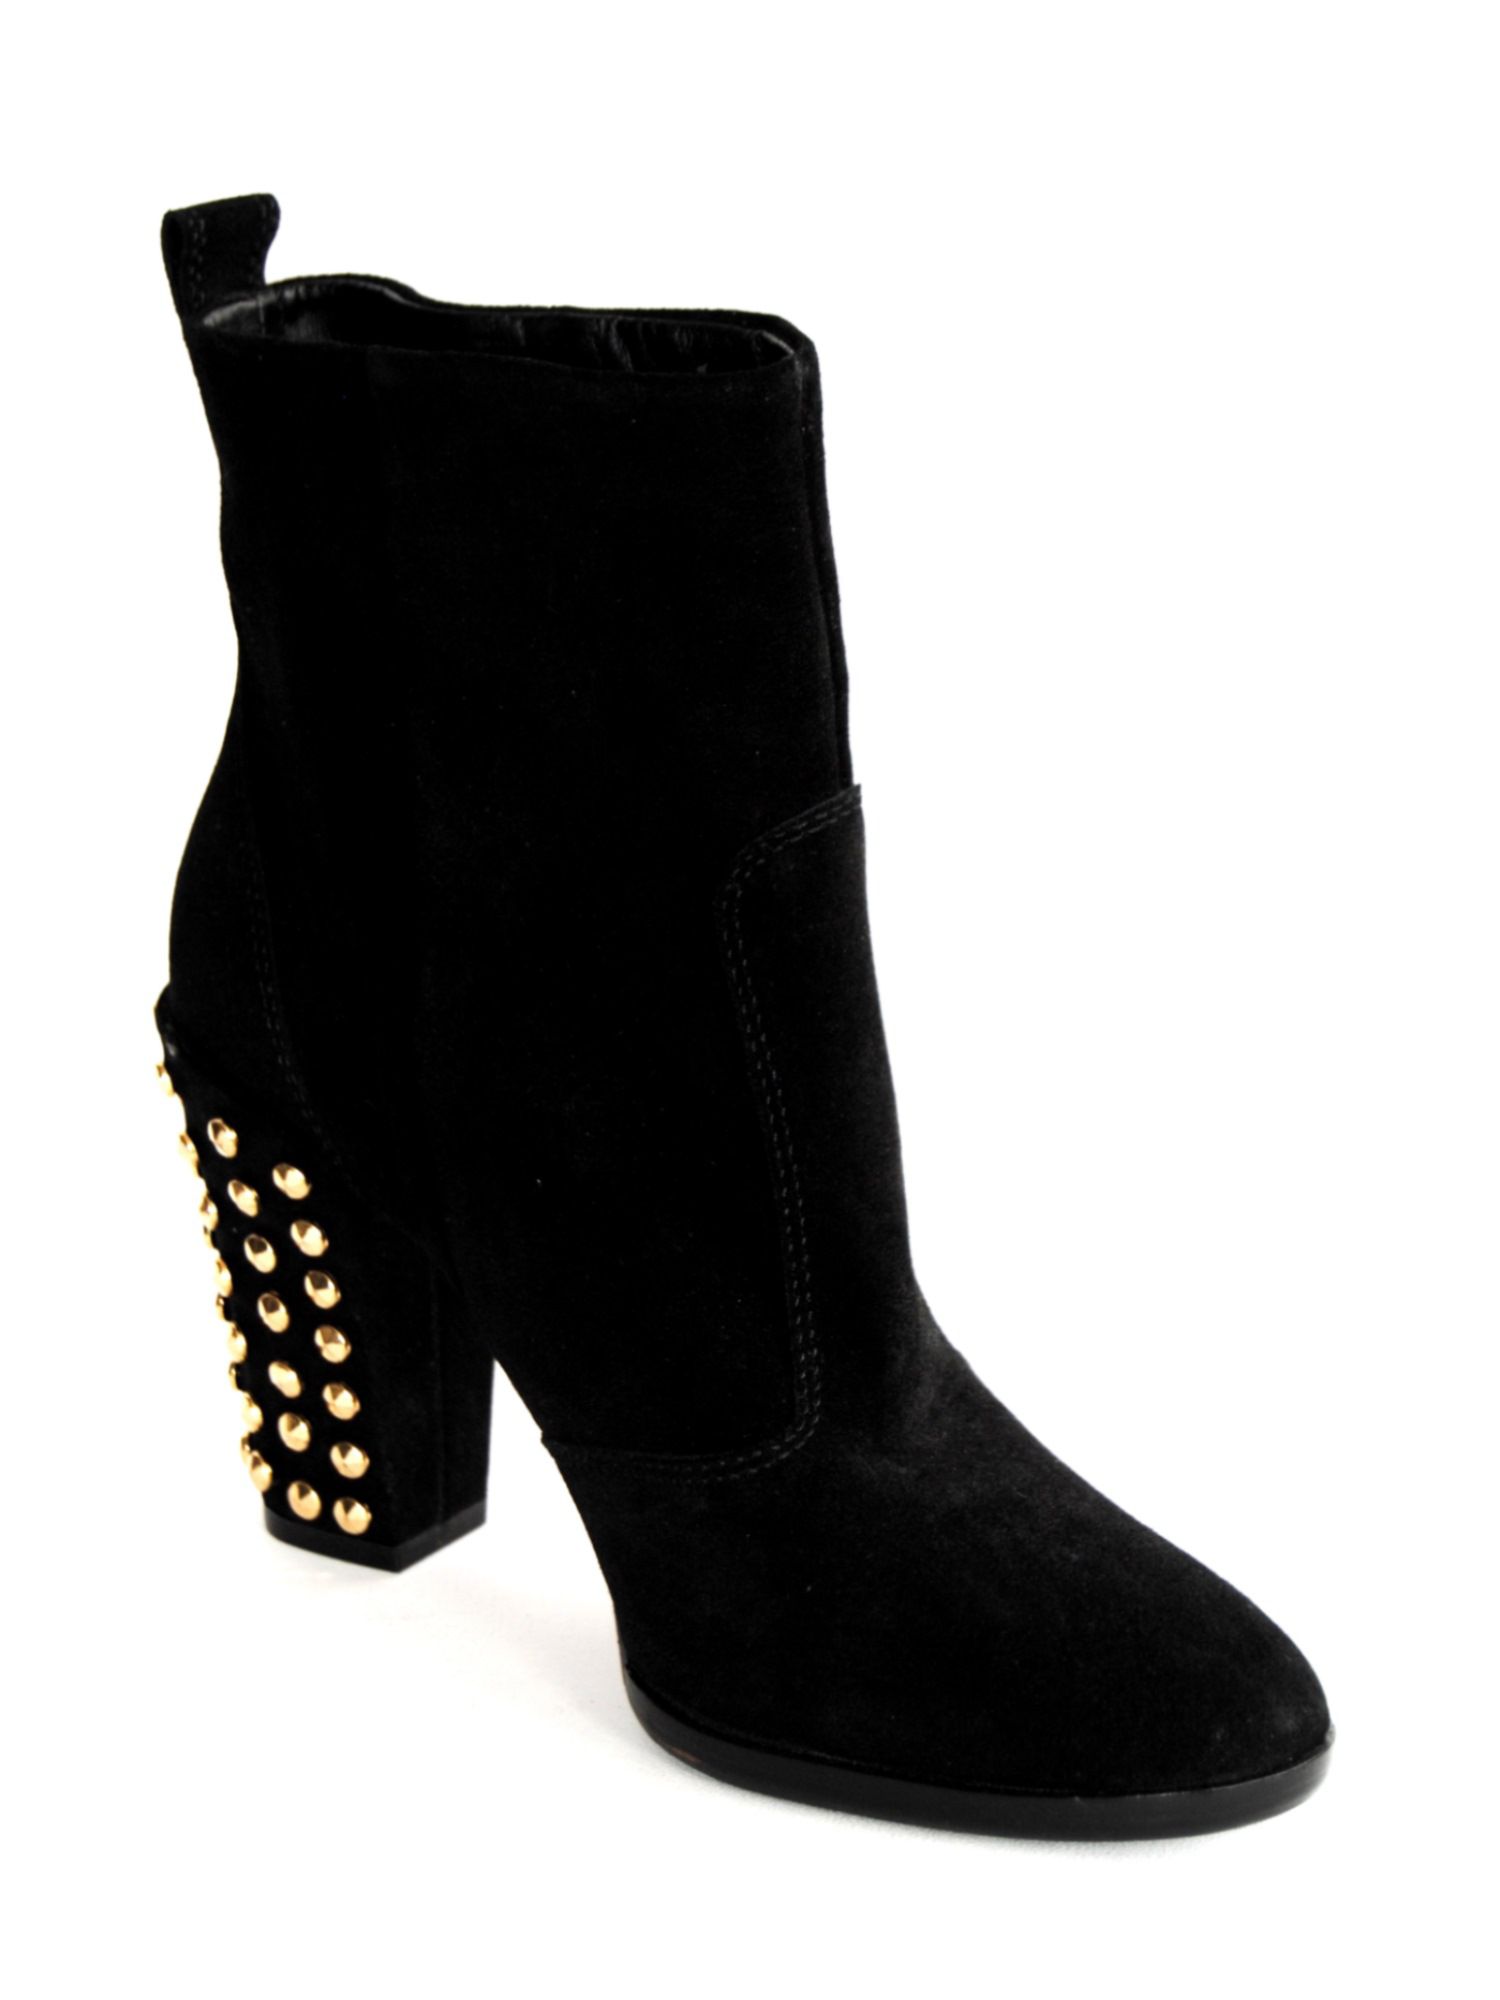 French connection Octanva Ankle Boots in Black | Lyst